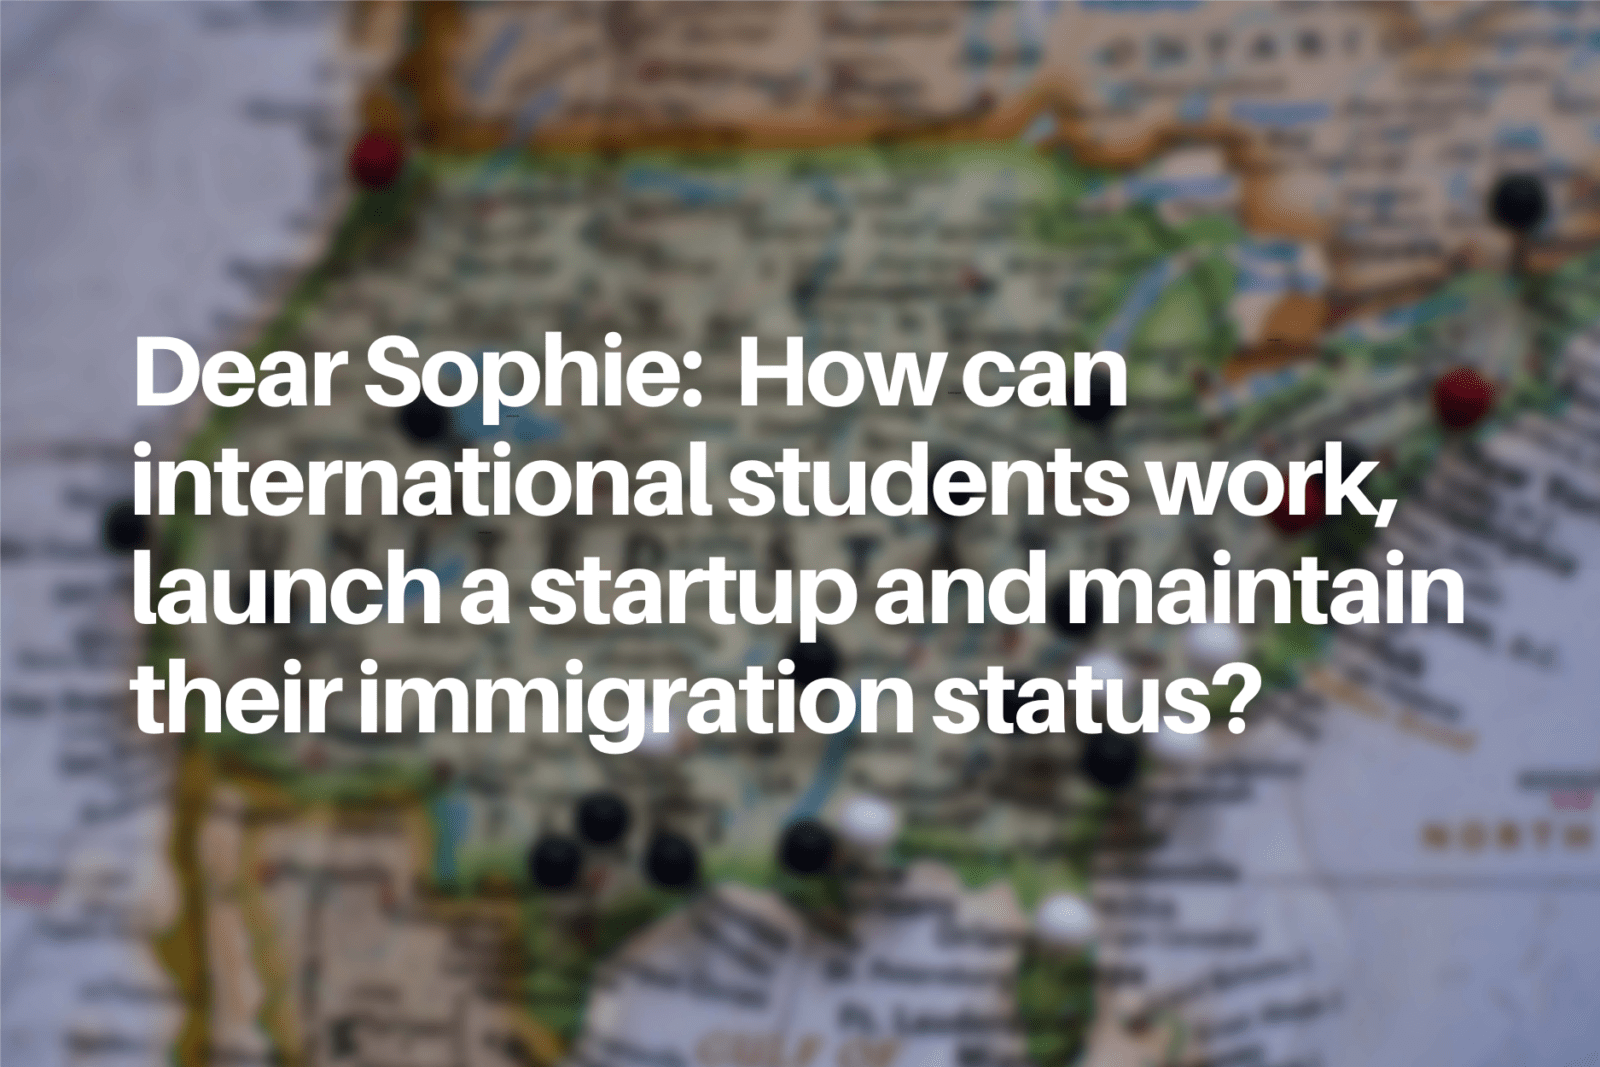 How can international students work, launch a startup and maintain their immigration status?